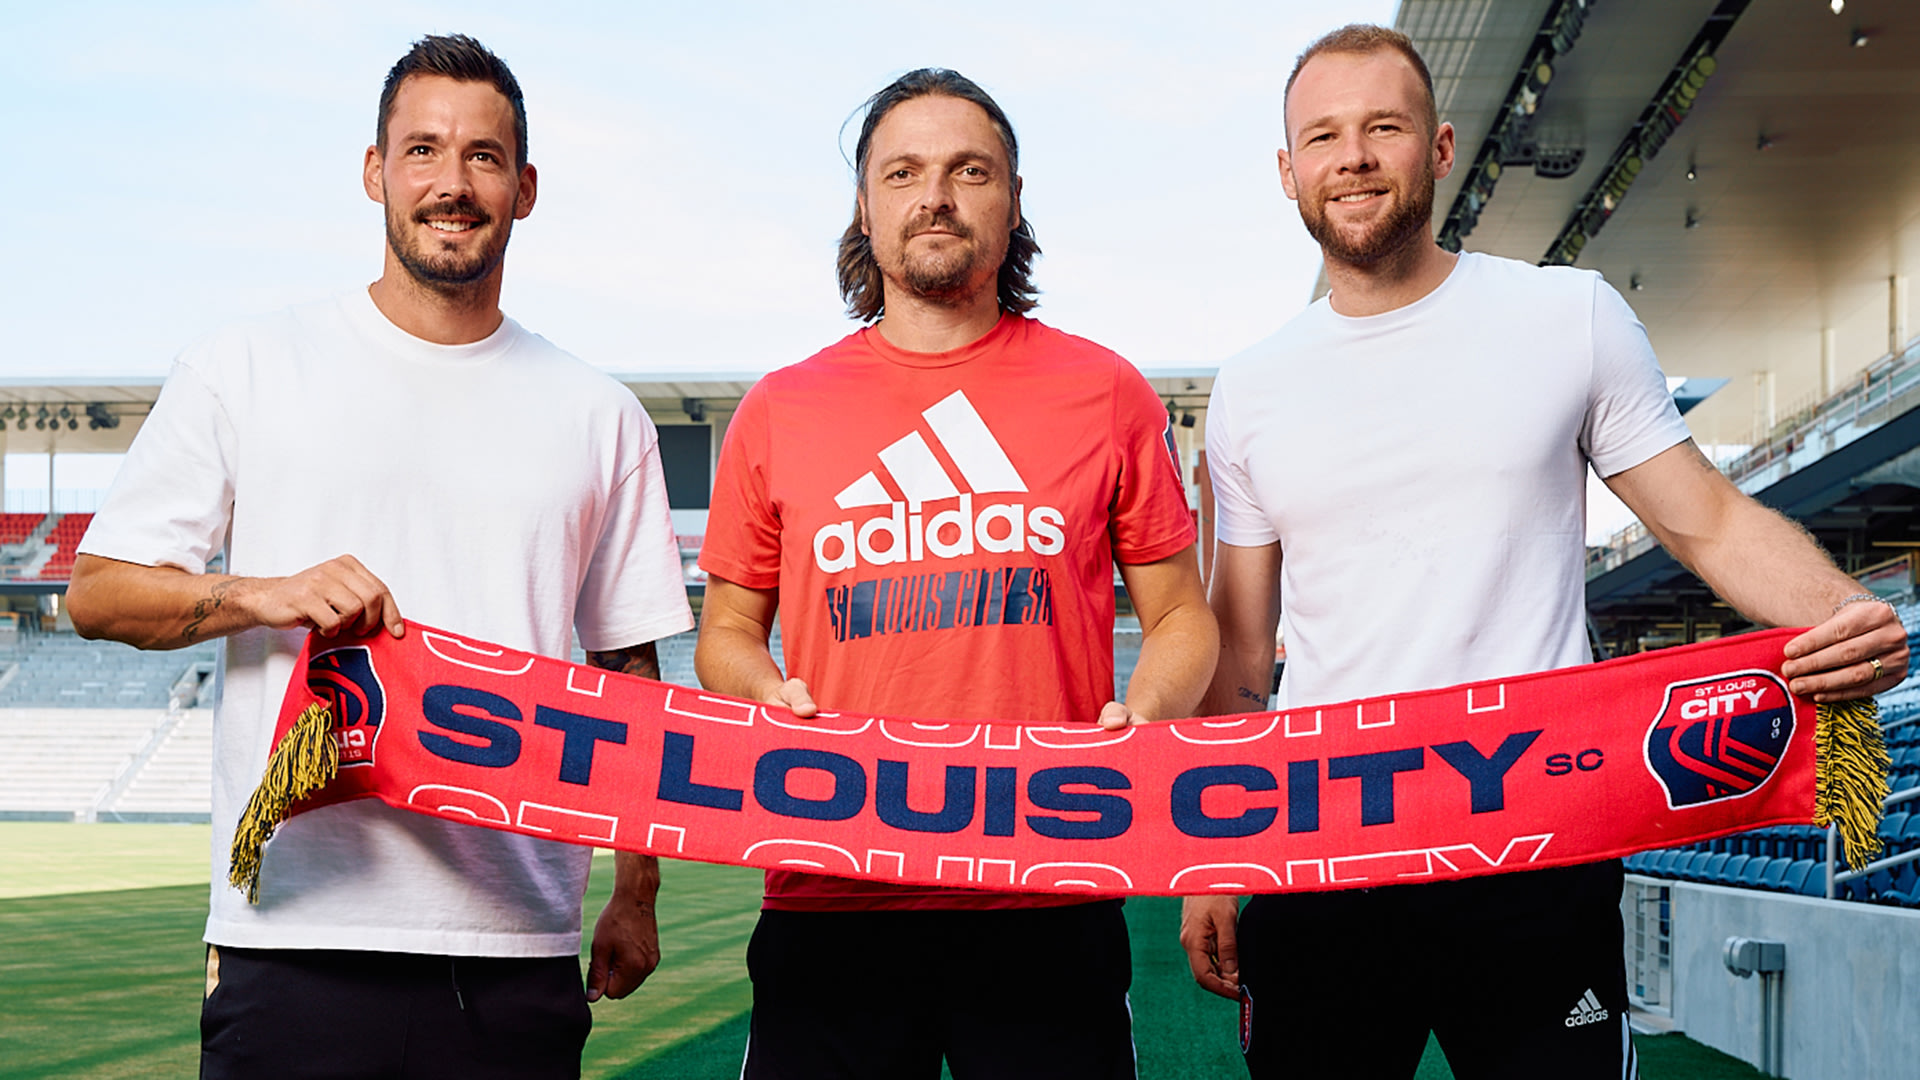 “We don’t need DPs”: St. Louis CITY's roster-building strategy for 2023